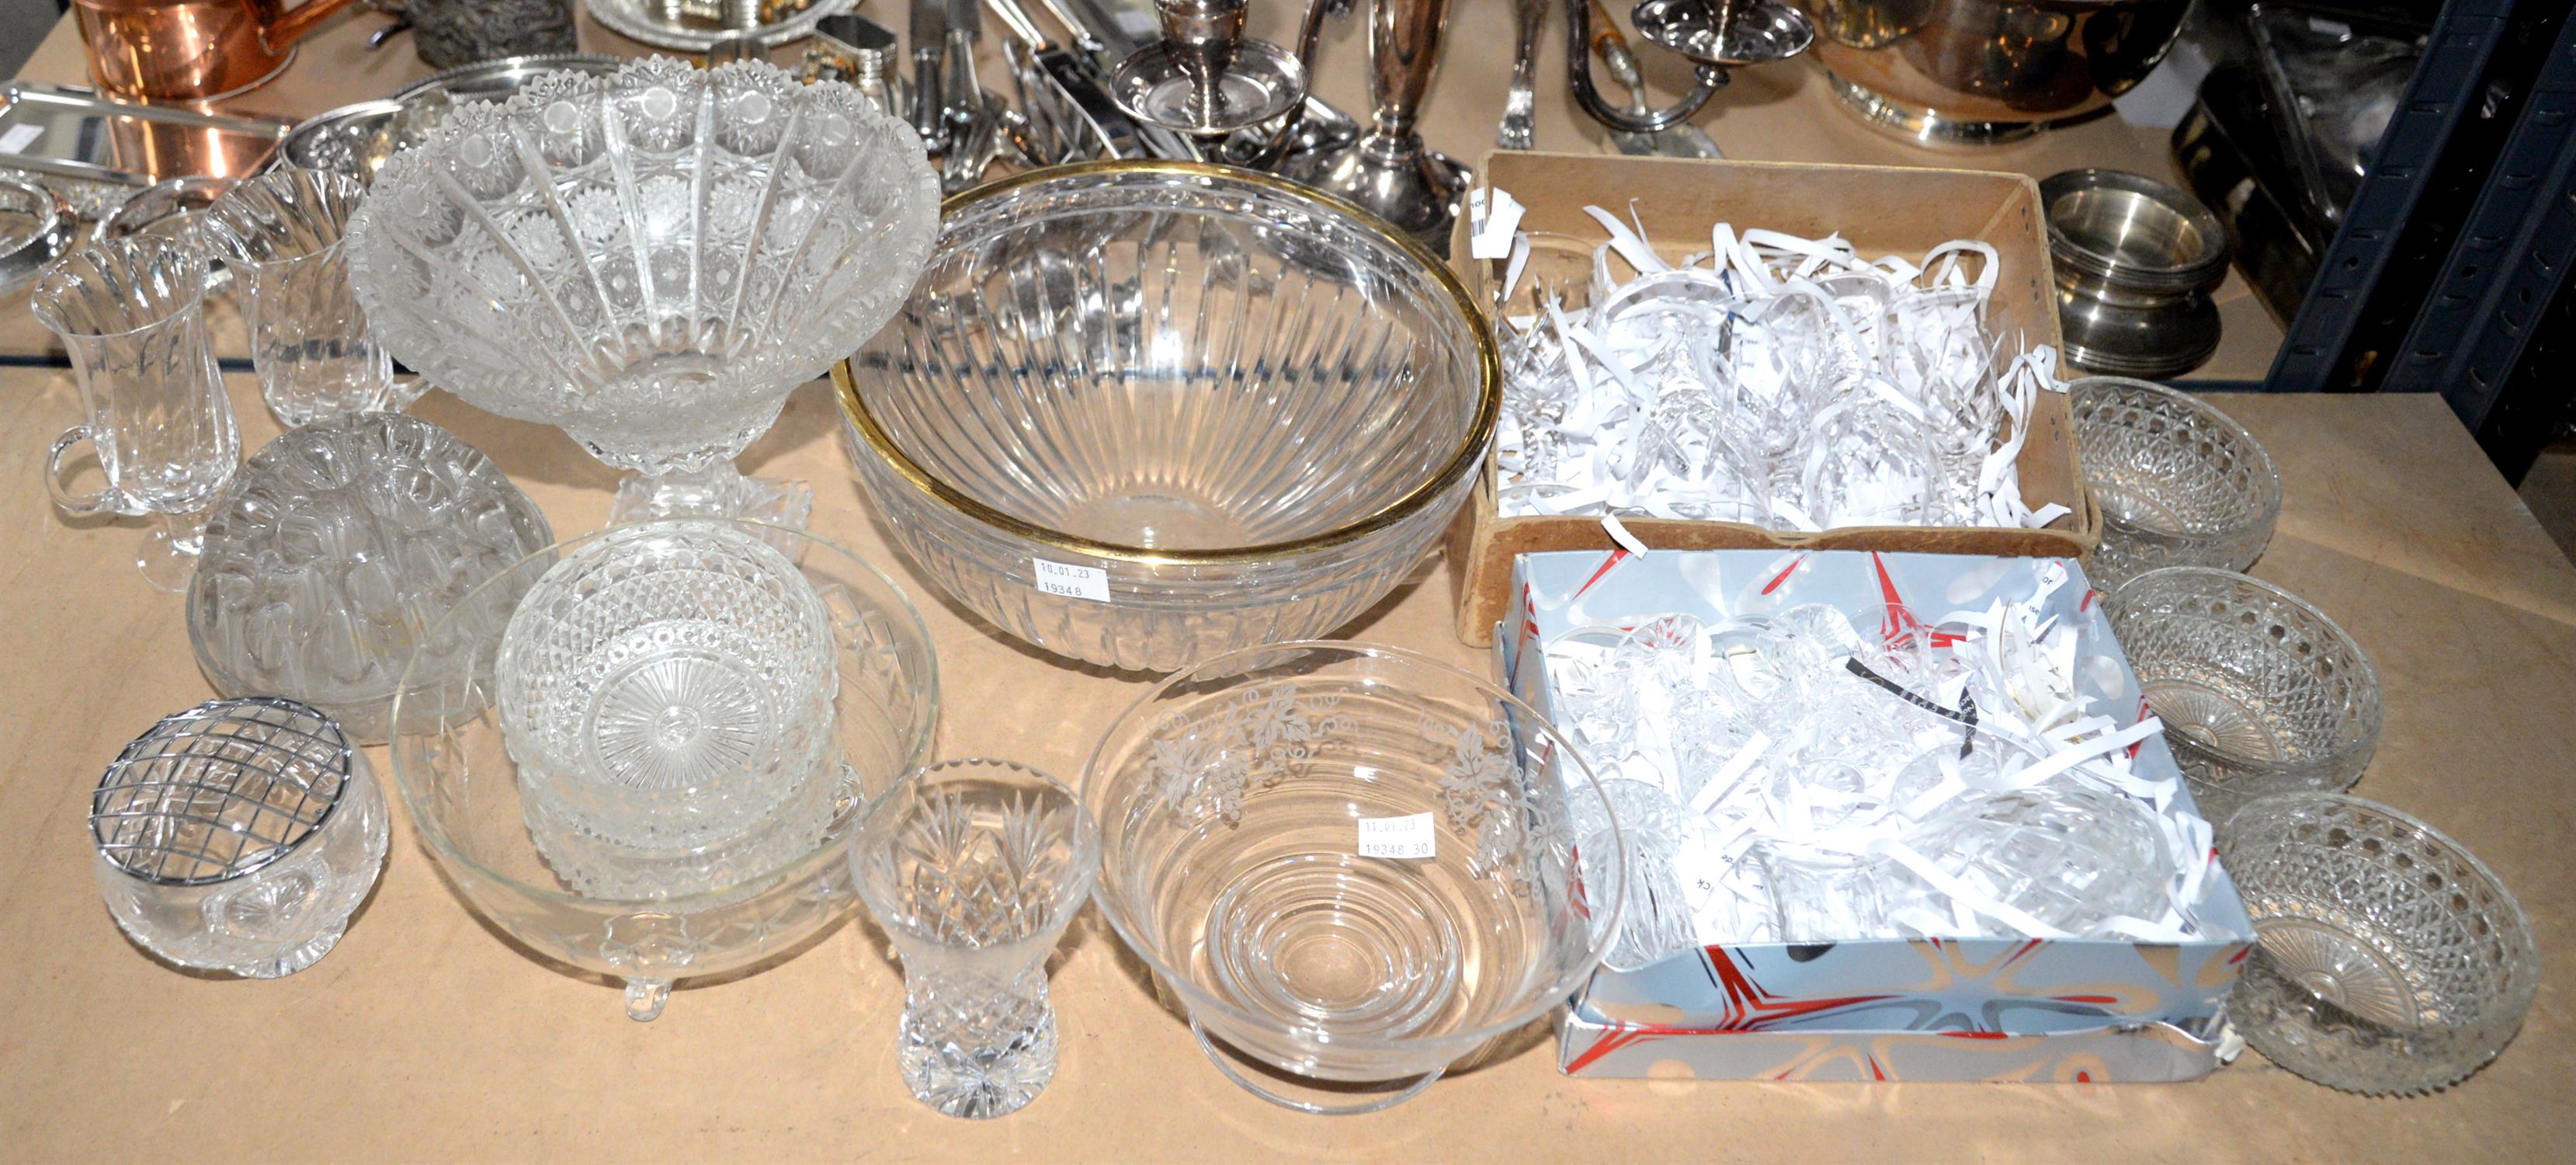 Glassware to include yellow glass bowls, clear glass candlesticks, dump weight, cut glass vase etc. - Image 2 of 2